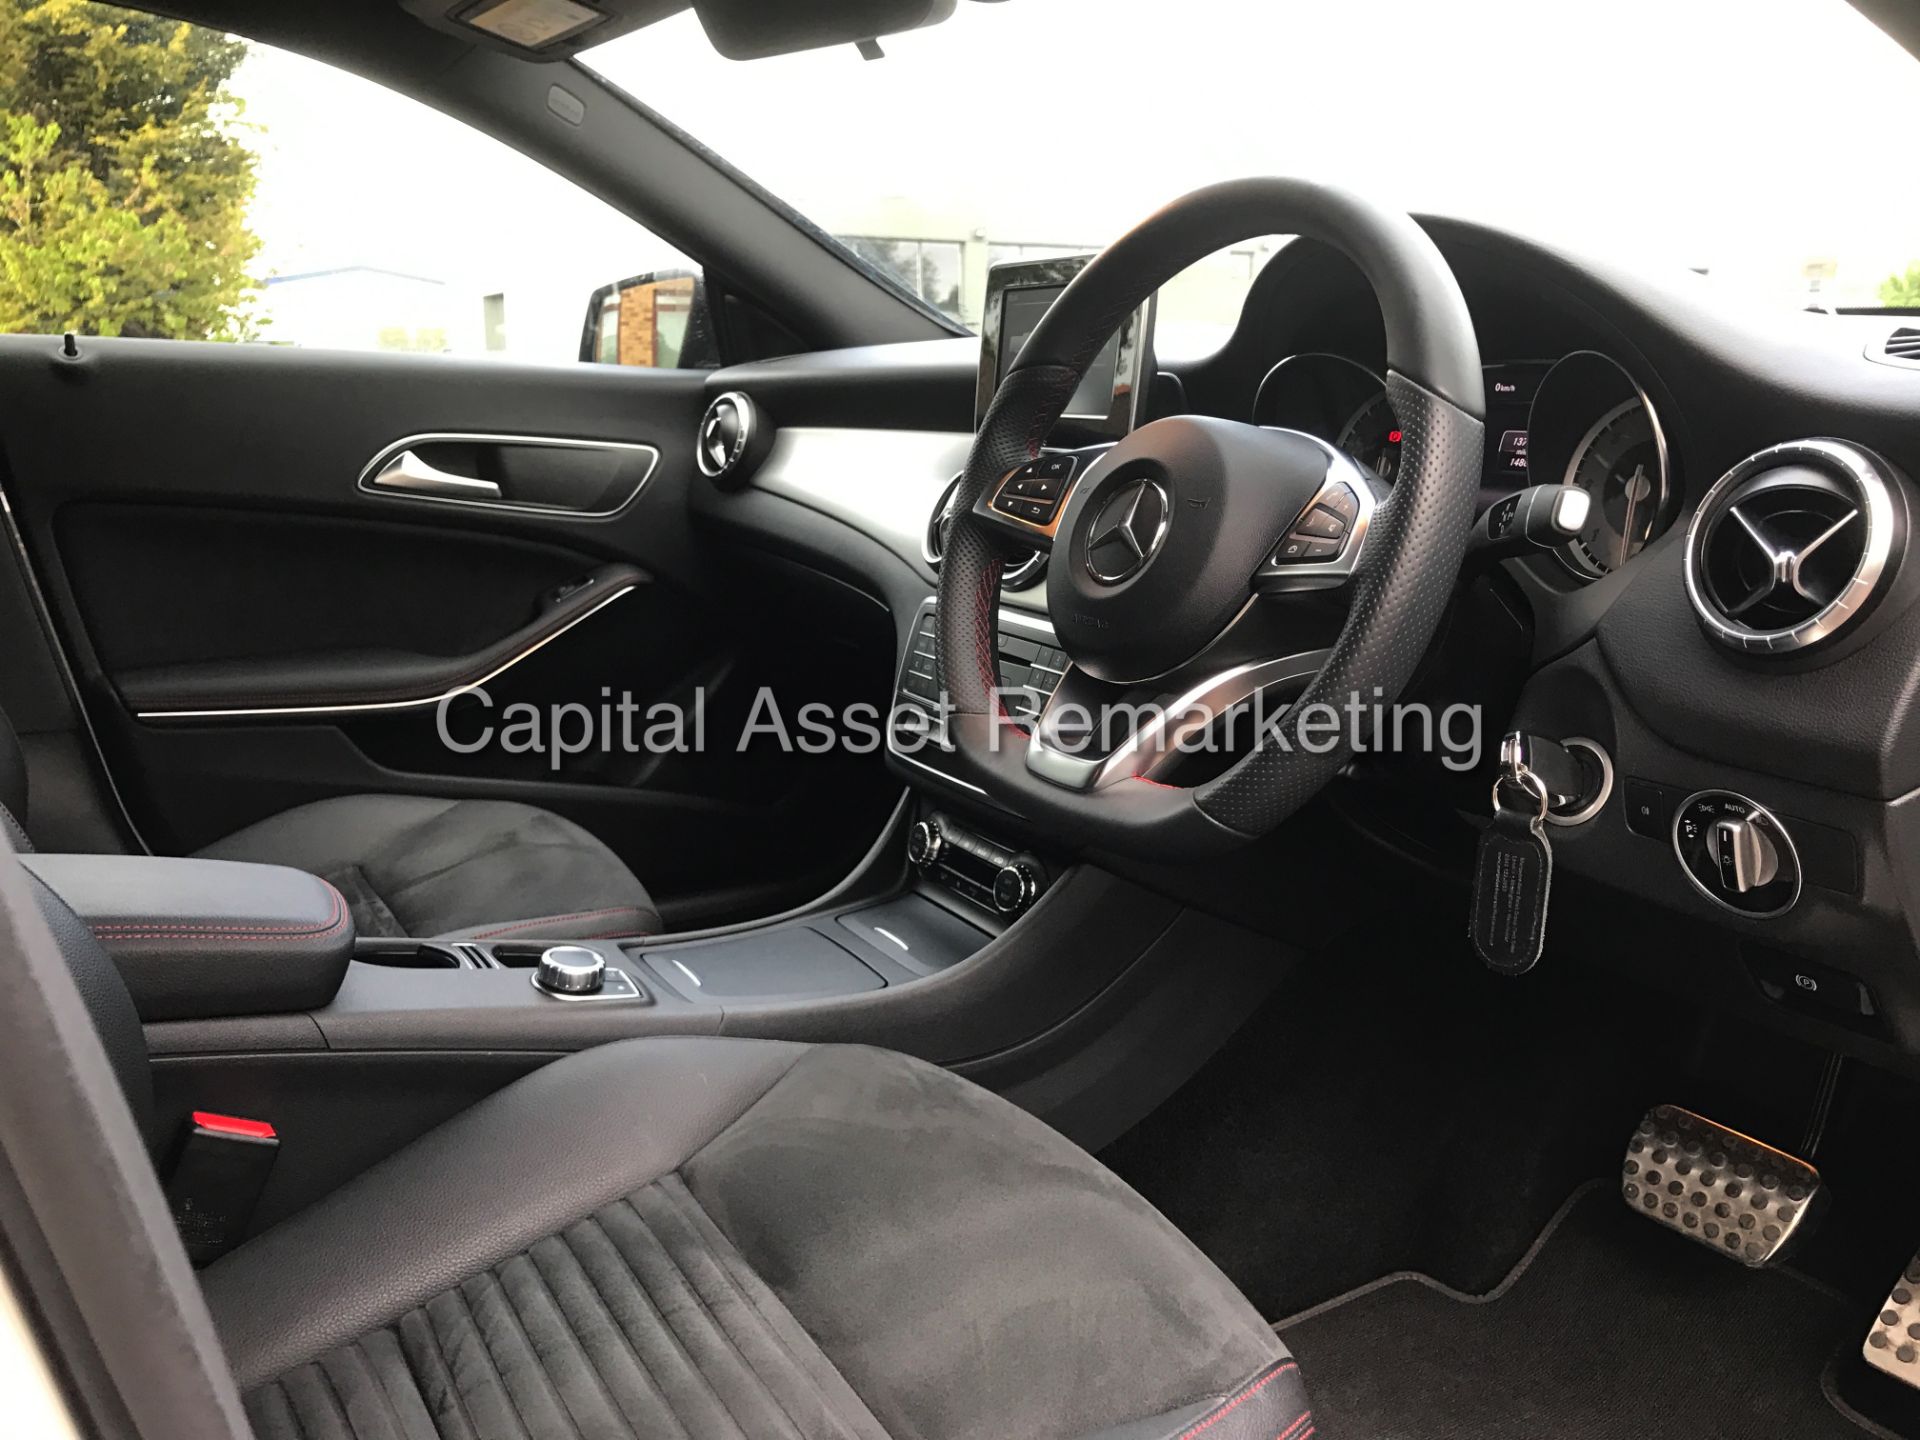 MERCEDES-BENZ CLA 220d 'AMG - NIGHT EDITION' (2015) '7-G AUTO - LEATHER - SAT NAV' *HUGE SPEC* - Image 11 of 24